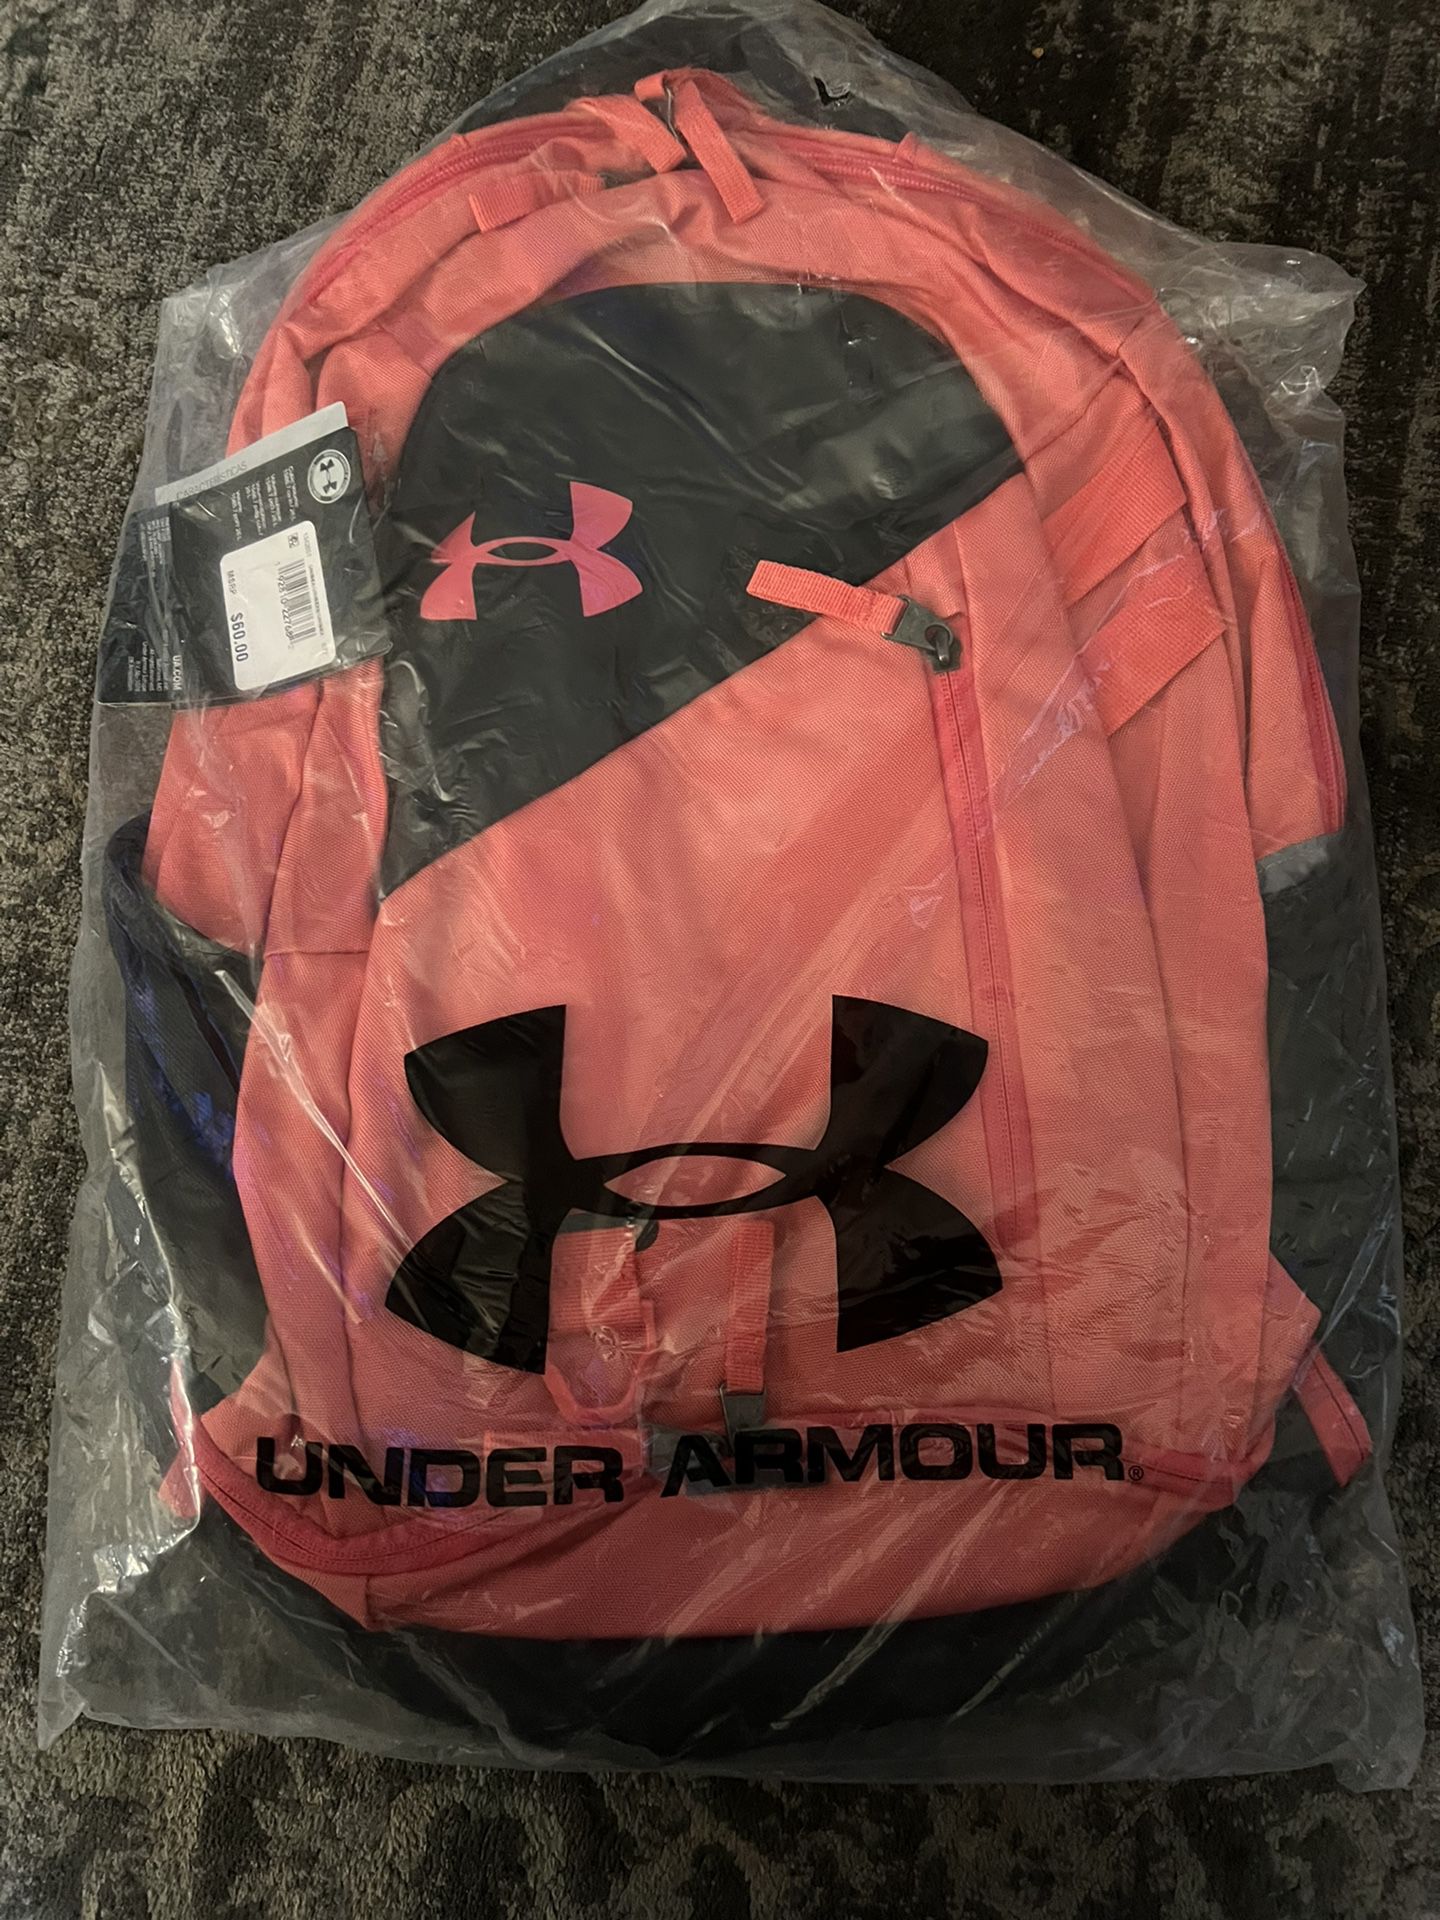 Under Armour Backpack (PINK) for Sale in Sunnyvale, CA - OfferUp